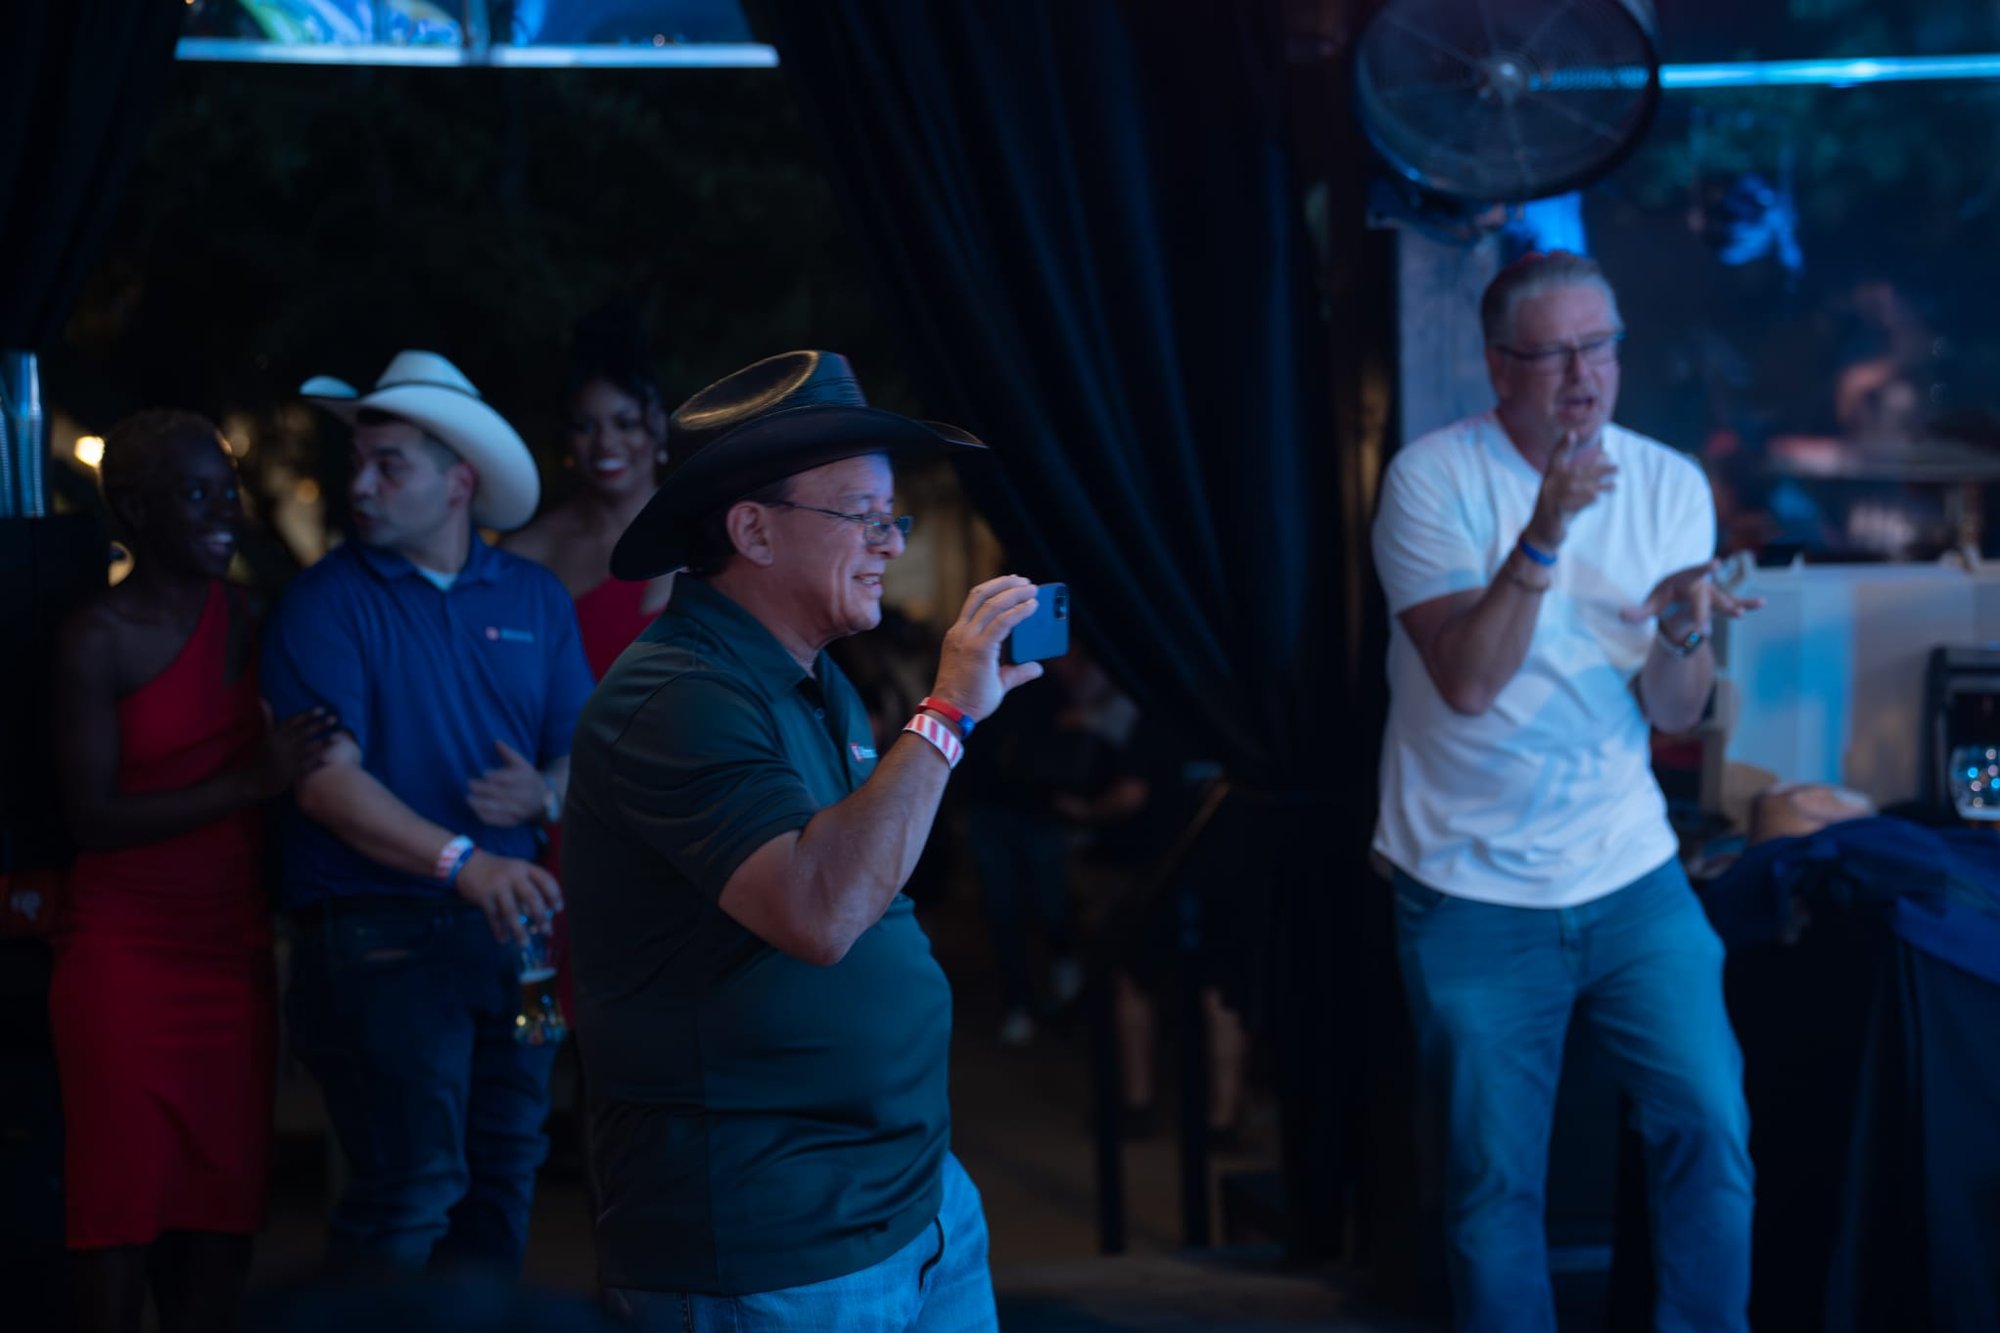 Emerald City Band performs for Security 101 Appreciation Event at Happiest Hour in Dallas, TX